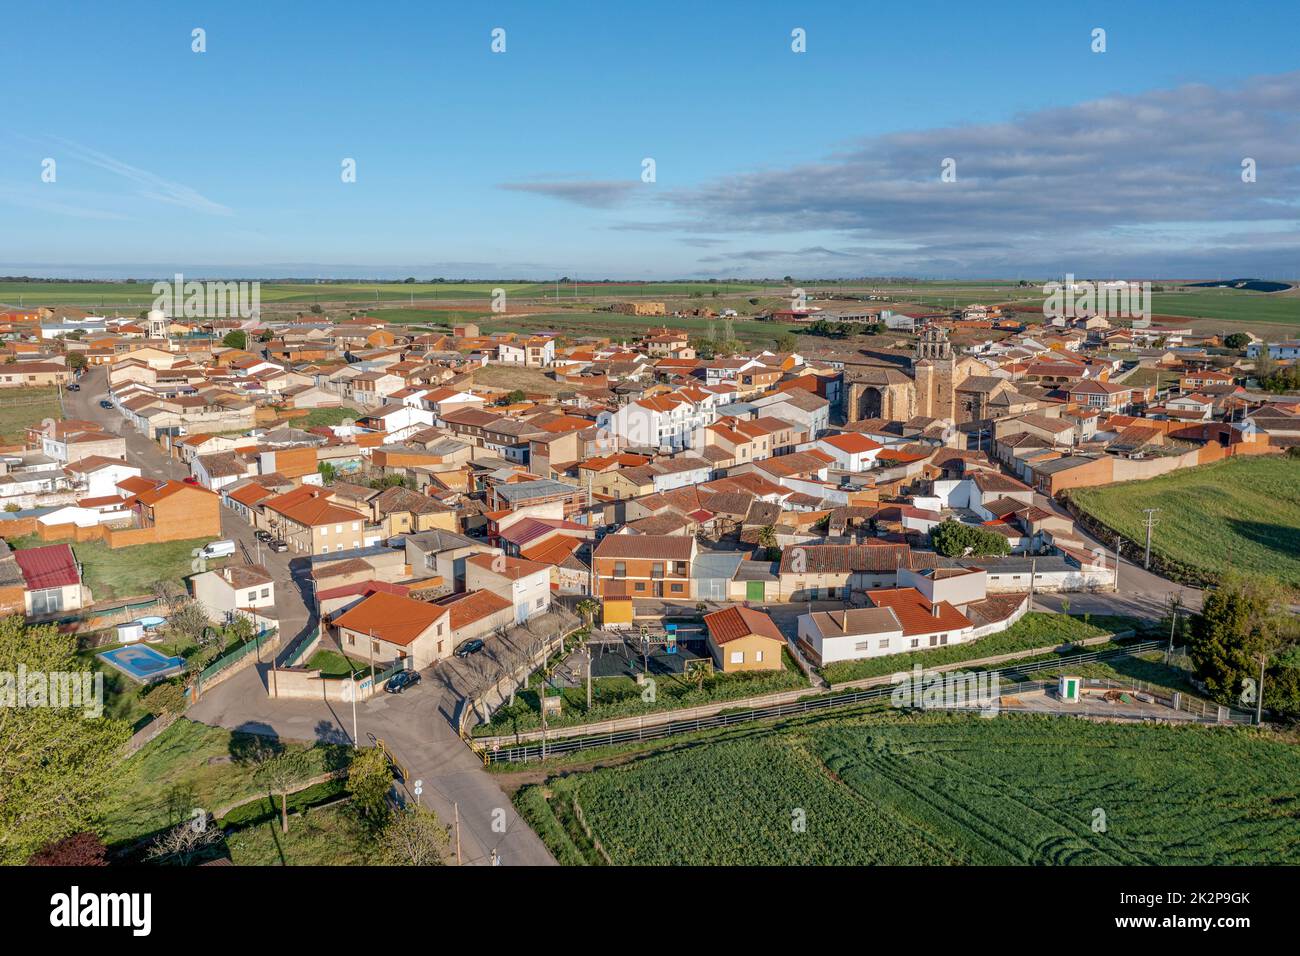 General view of La Hiniesta, a Spanish municipality and town in the province of Zamora, Spain Stock Photo